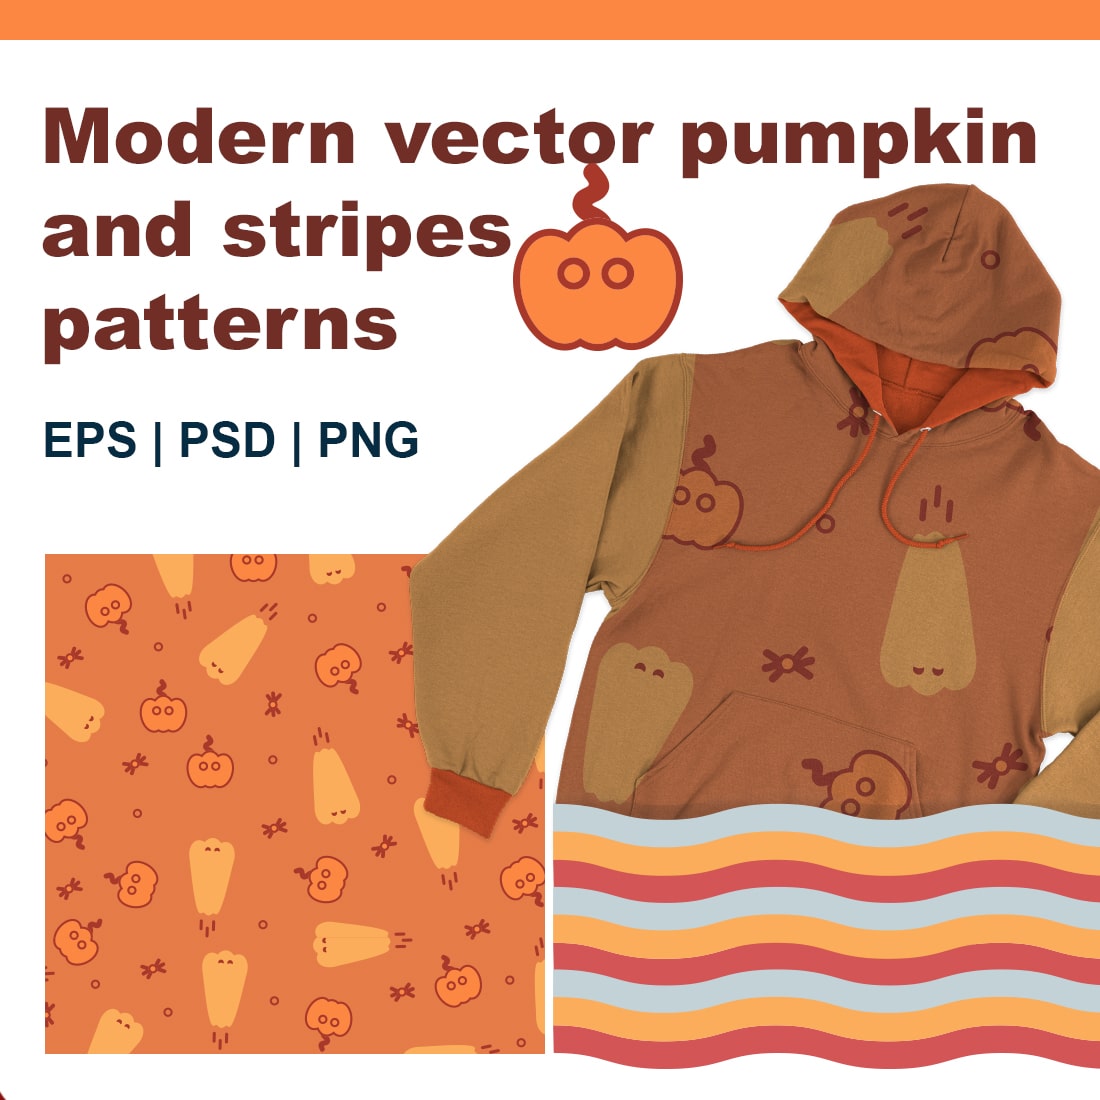 All eyes on your product with this design! Exclusive and modern pumpkin and color striped pattern design for your successful projects! cover image.